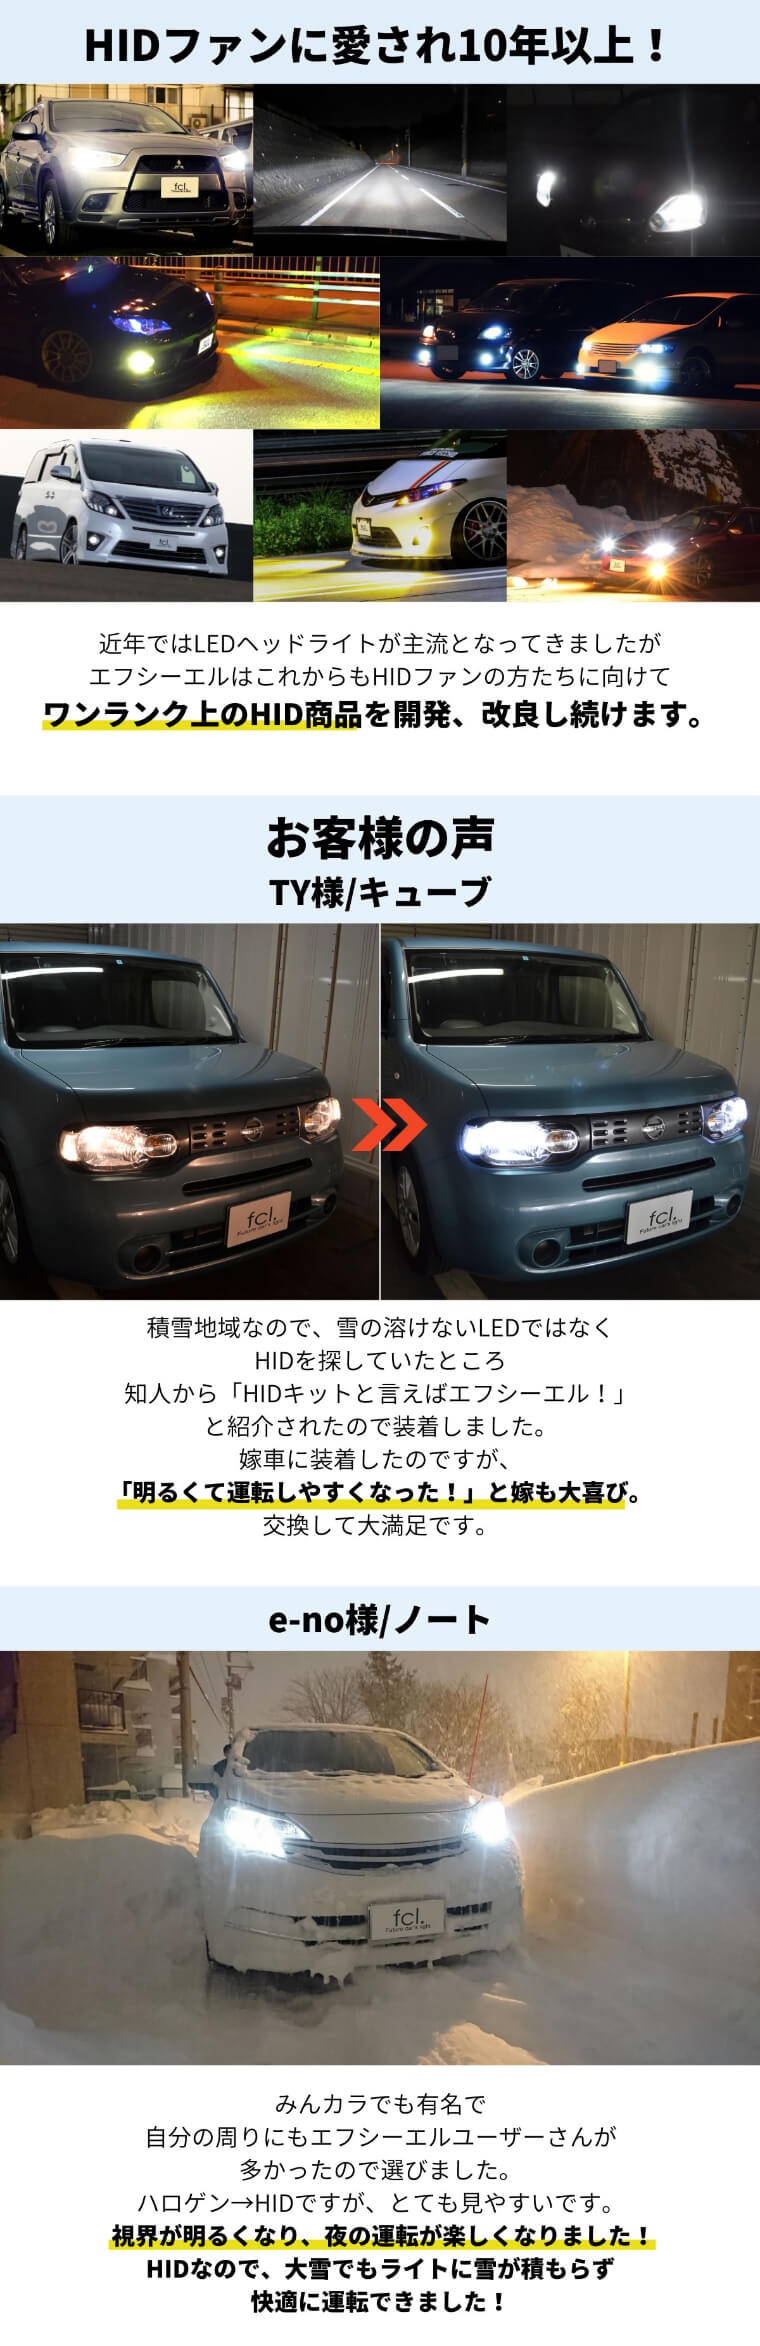 55W H4 Hi/Lo リレー付き HIDキット【公式通販】fcl. 車のHID専門店